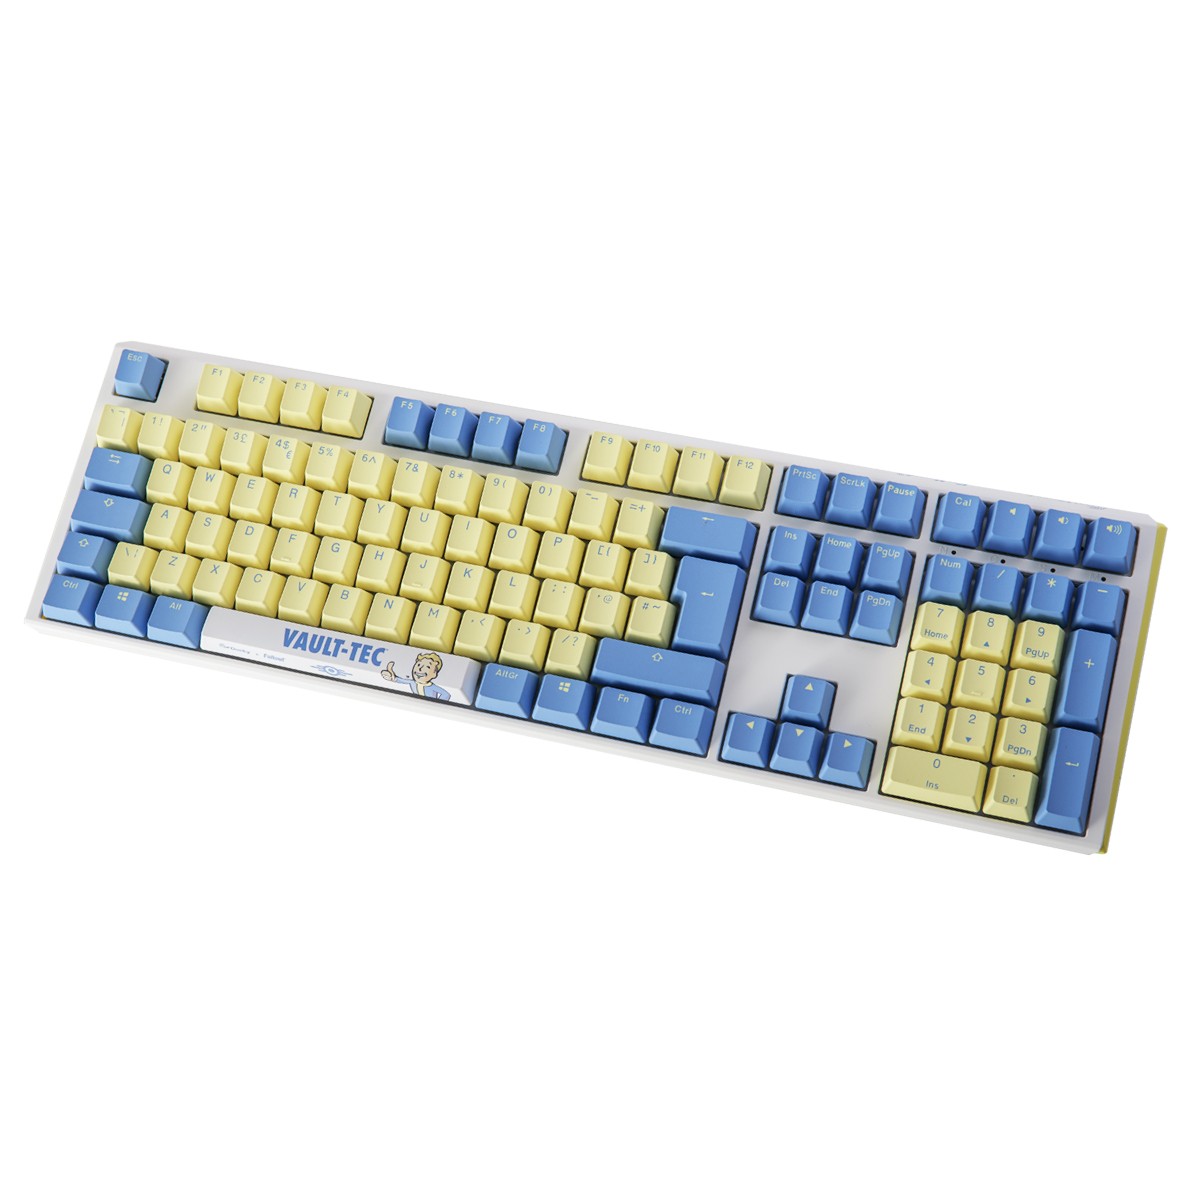 Ducky x Fallout One 3 RGB LE Cherry Red Switch Mechanical Gaming Keyboard UK Layout